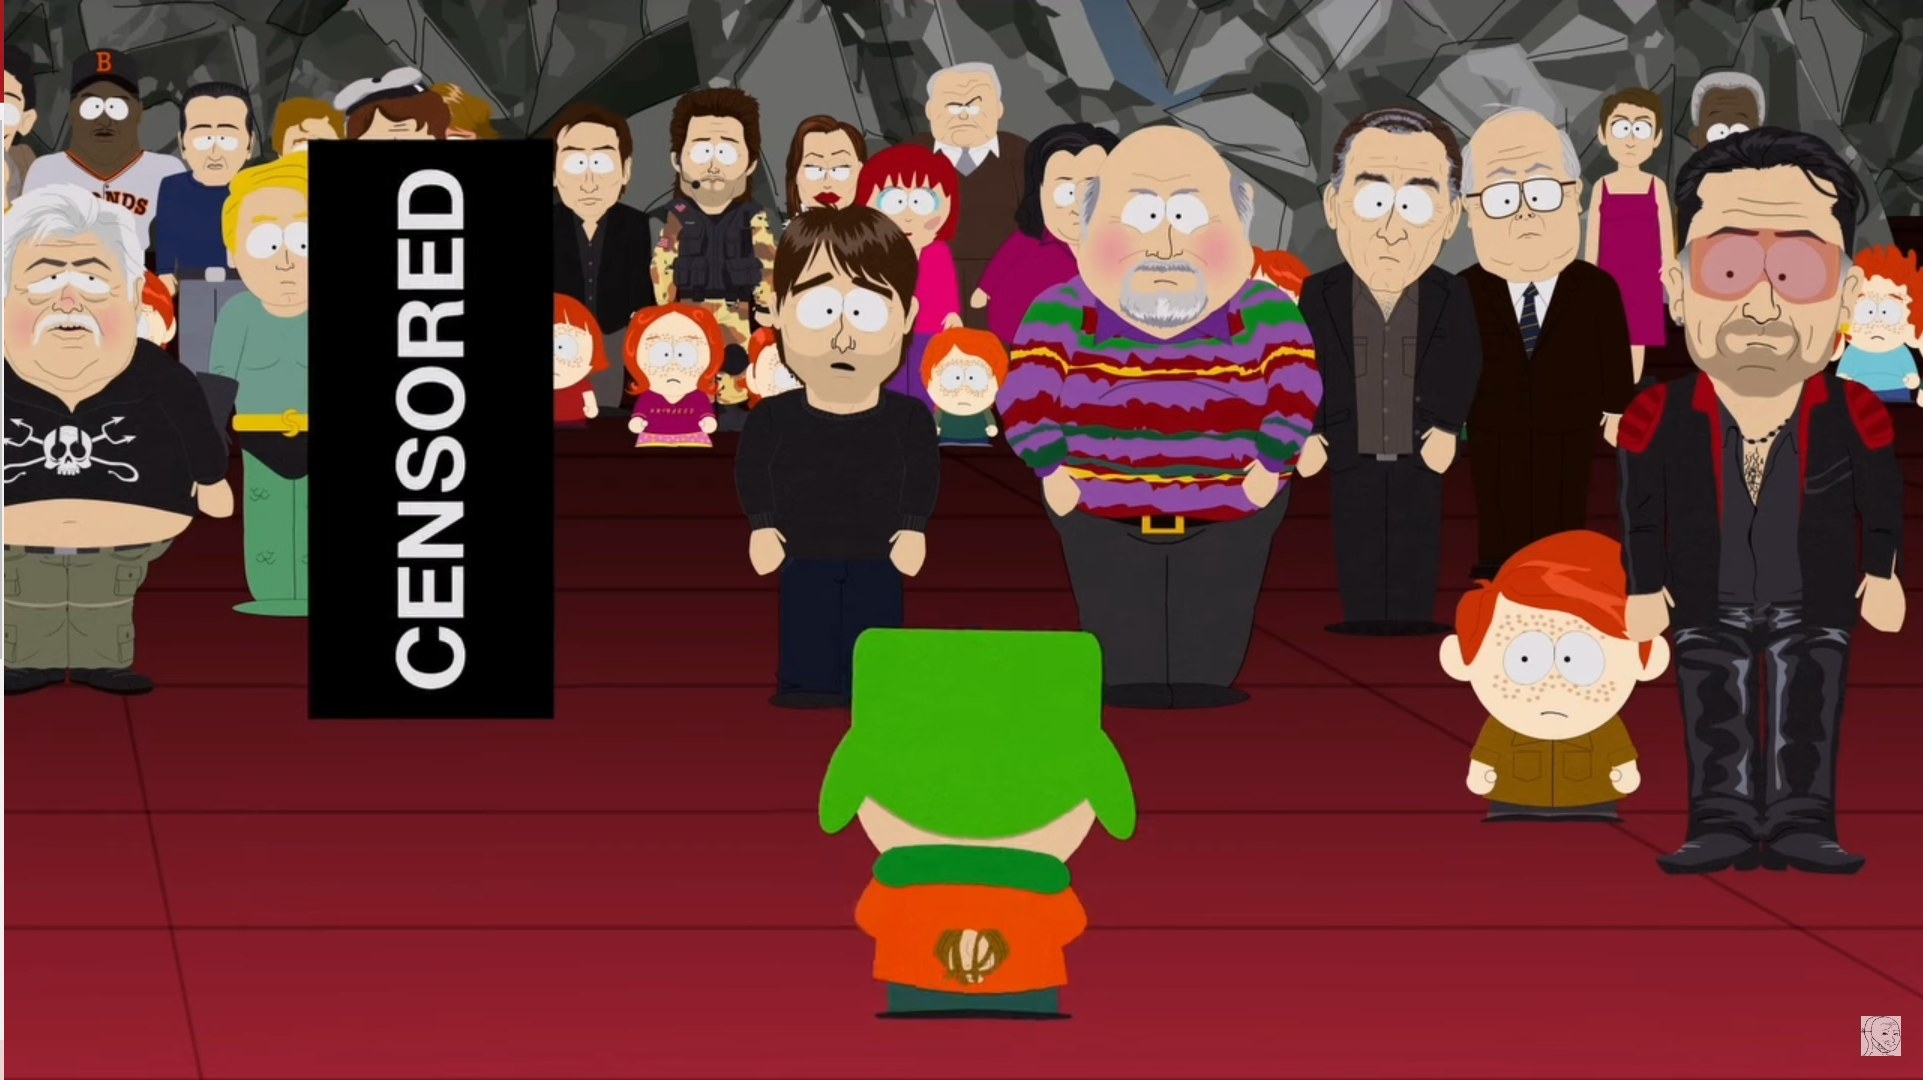 Kyle and various South Park characters, one of them censored, stand in a cave